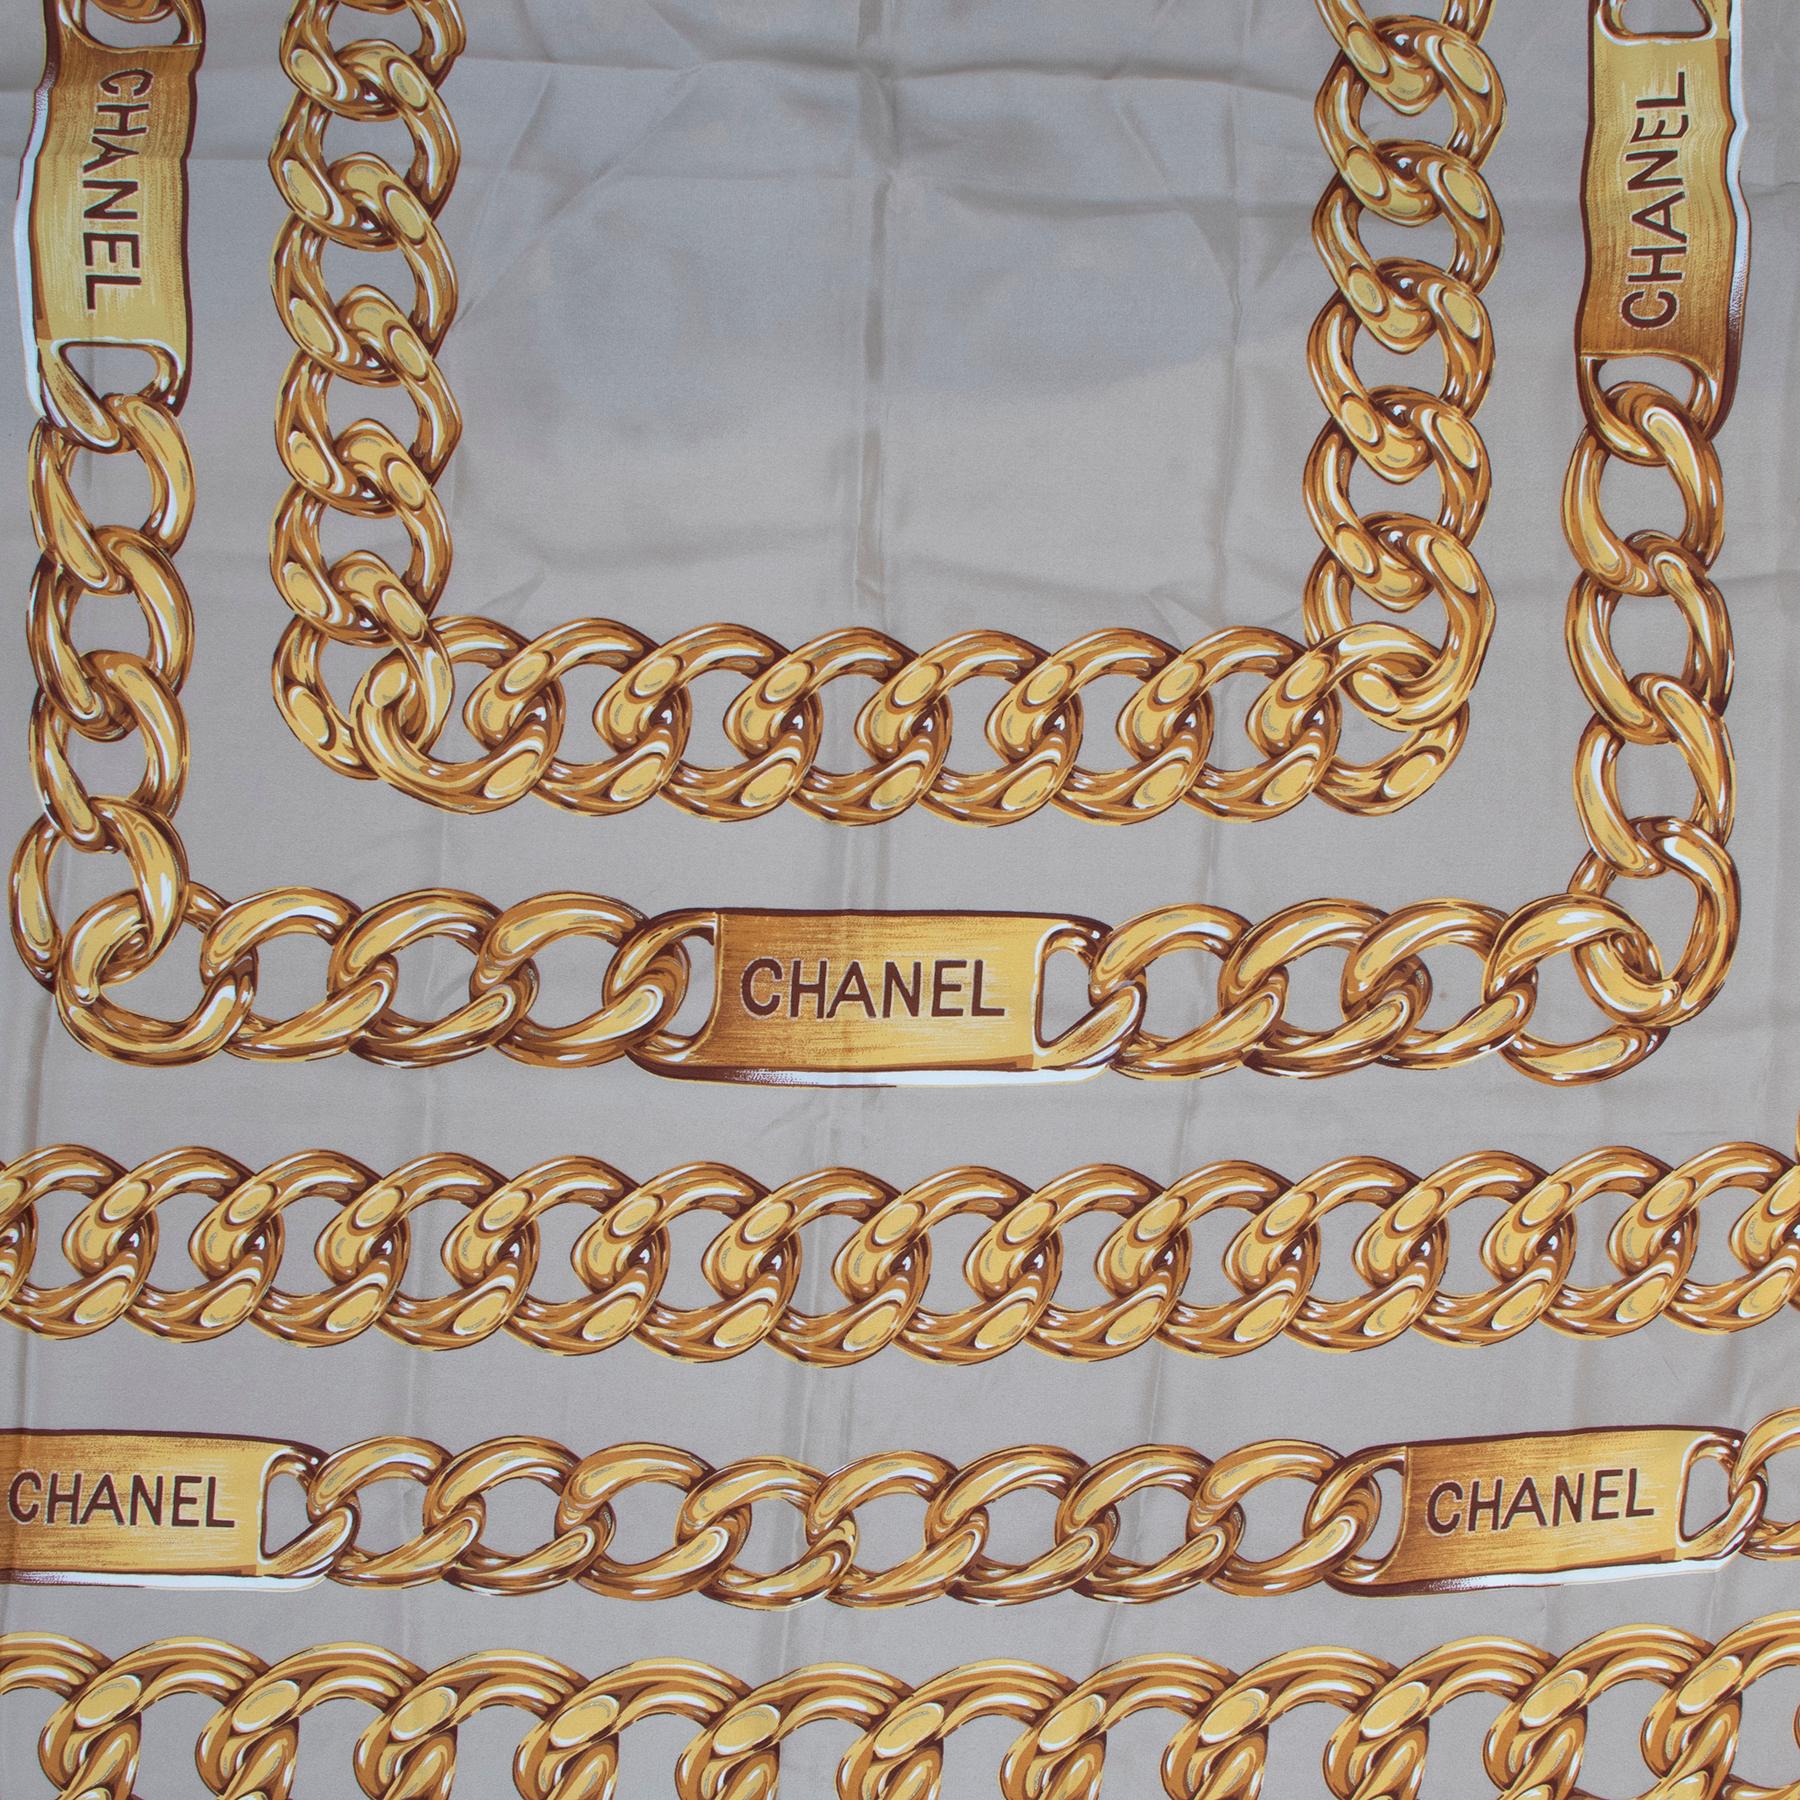 Chanel Vintage Gold Chain Medaillon XL Silk Scarf

A scarf just big enough to give your outfit an elegant look. Wear it for example over your shoulders like a cardigan! 

This Chanel 31 Rue Cambon Paris scarf is made of 100% silk and beautifully